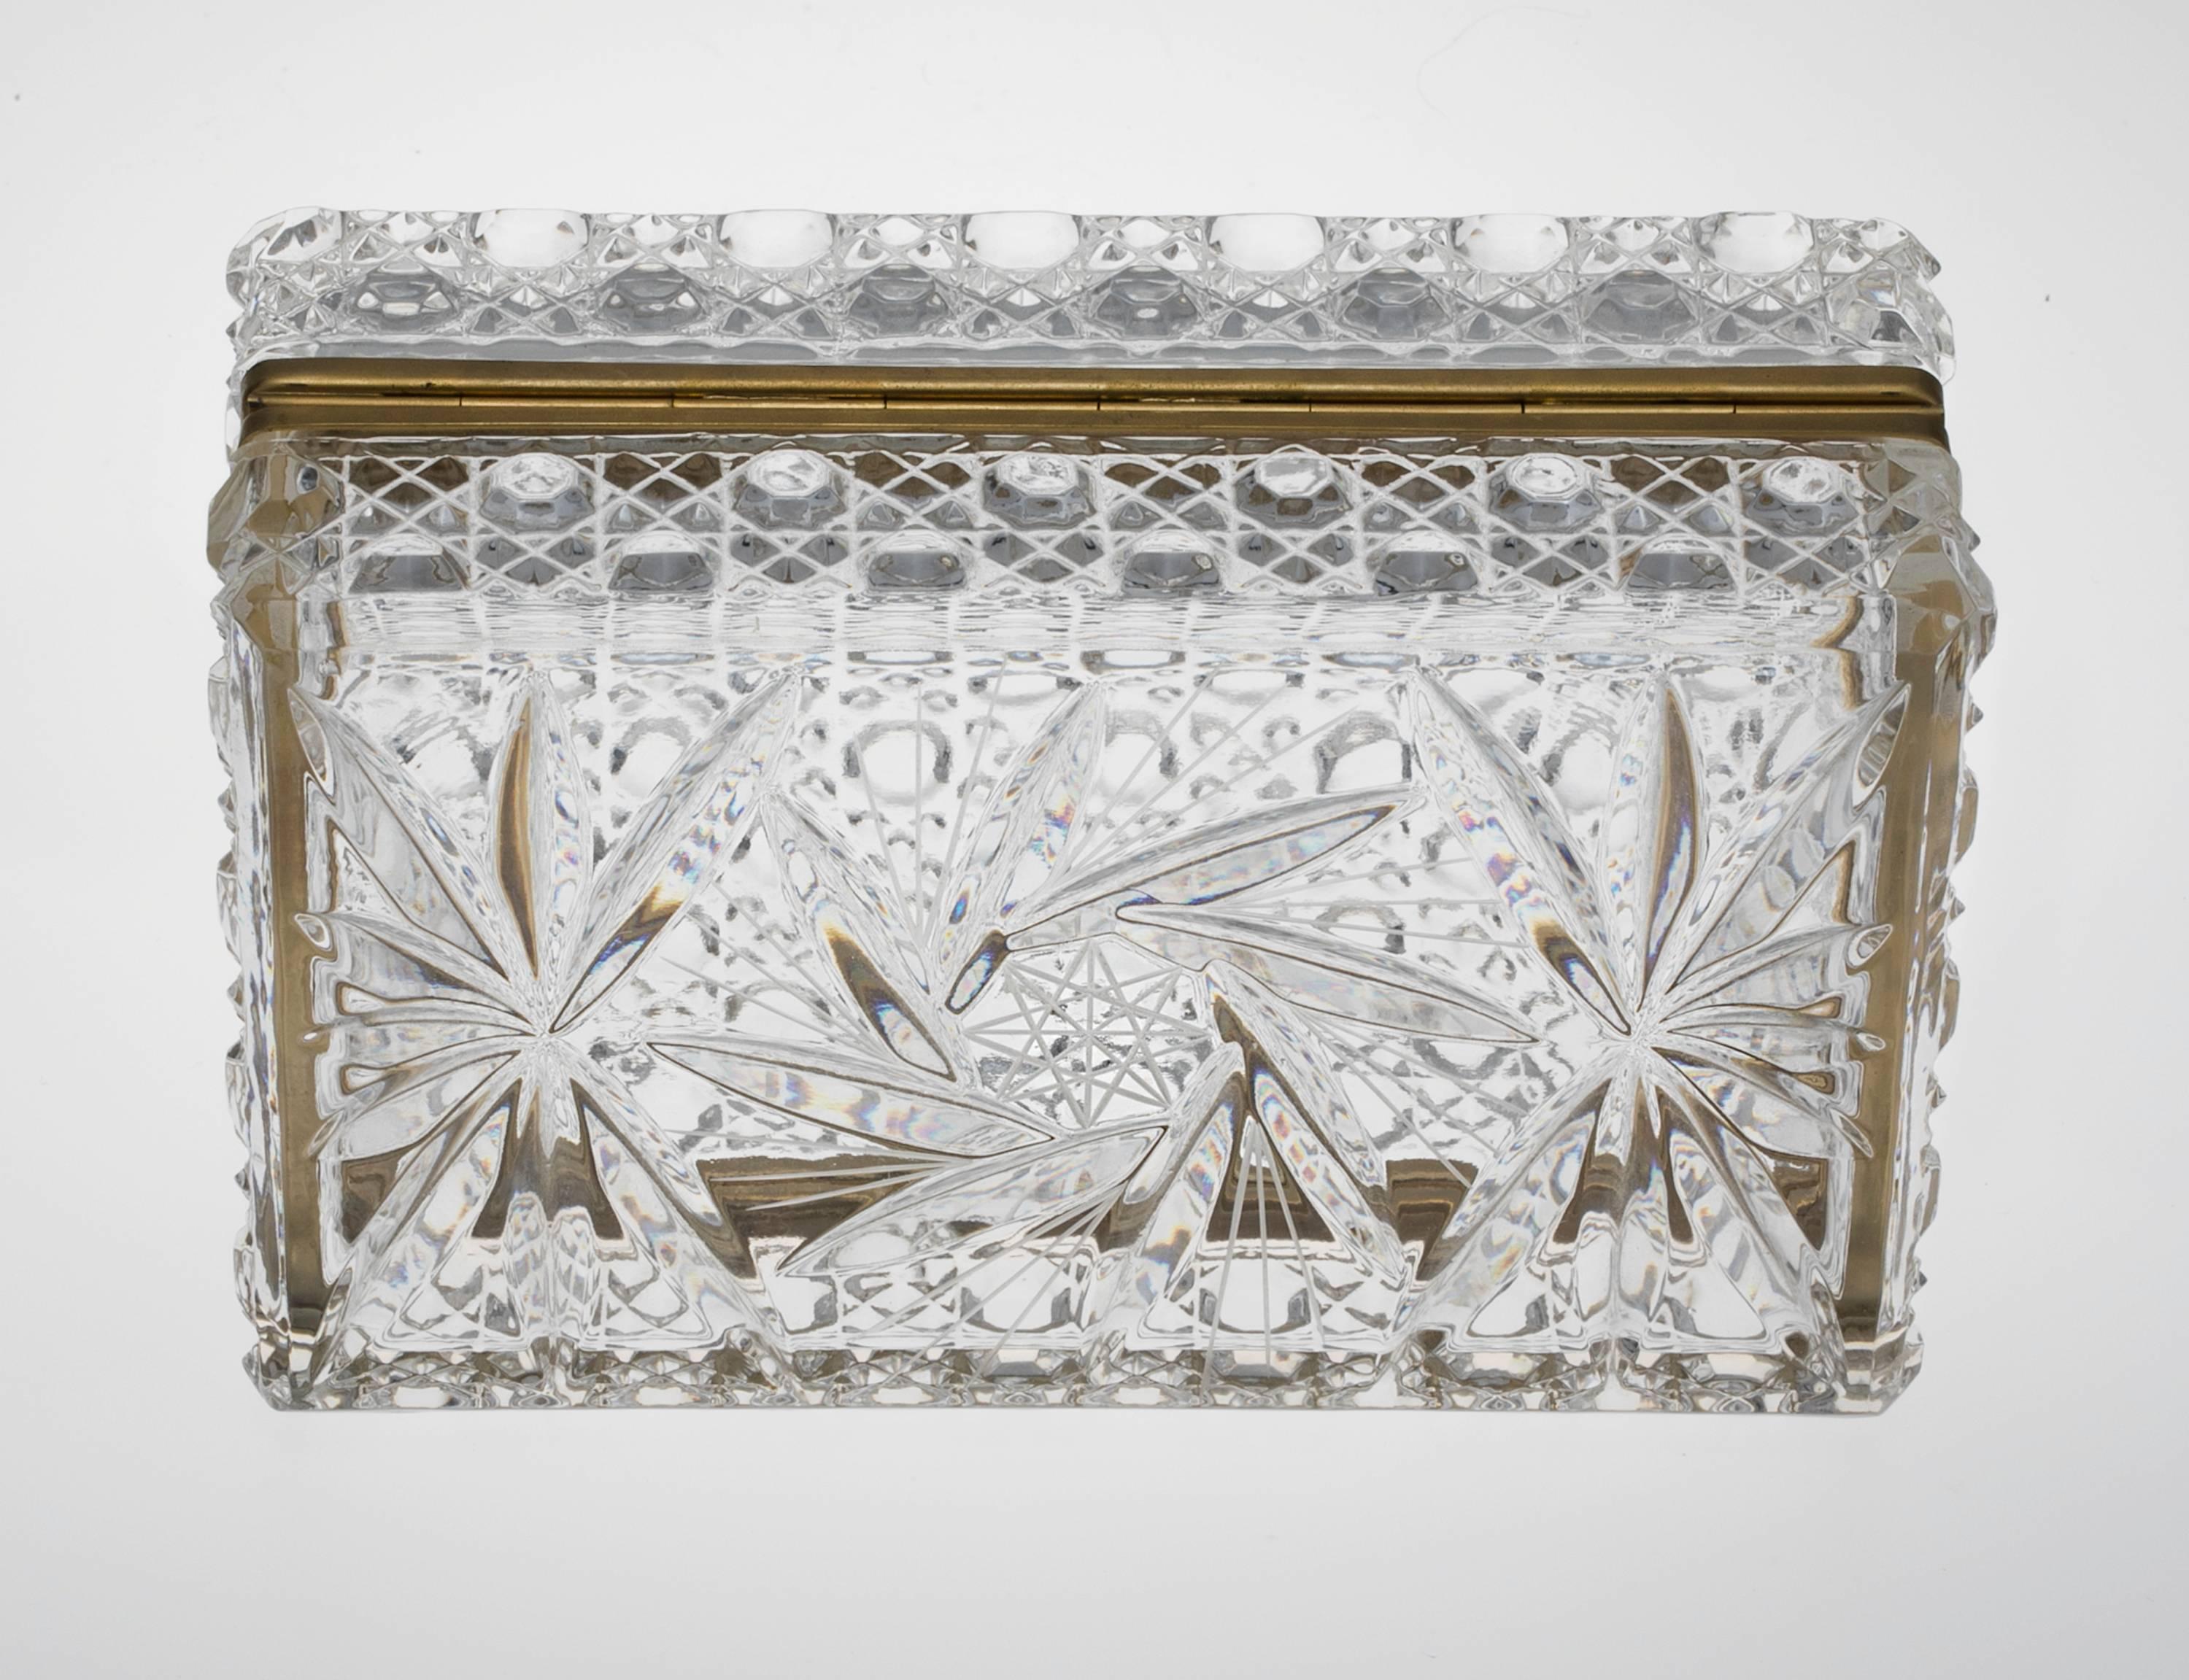 Hand-Crafted Cut Crystal Jewelry Box